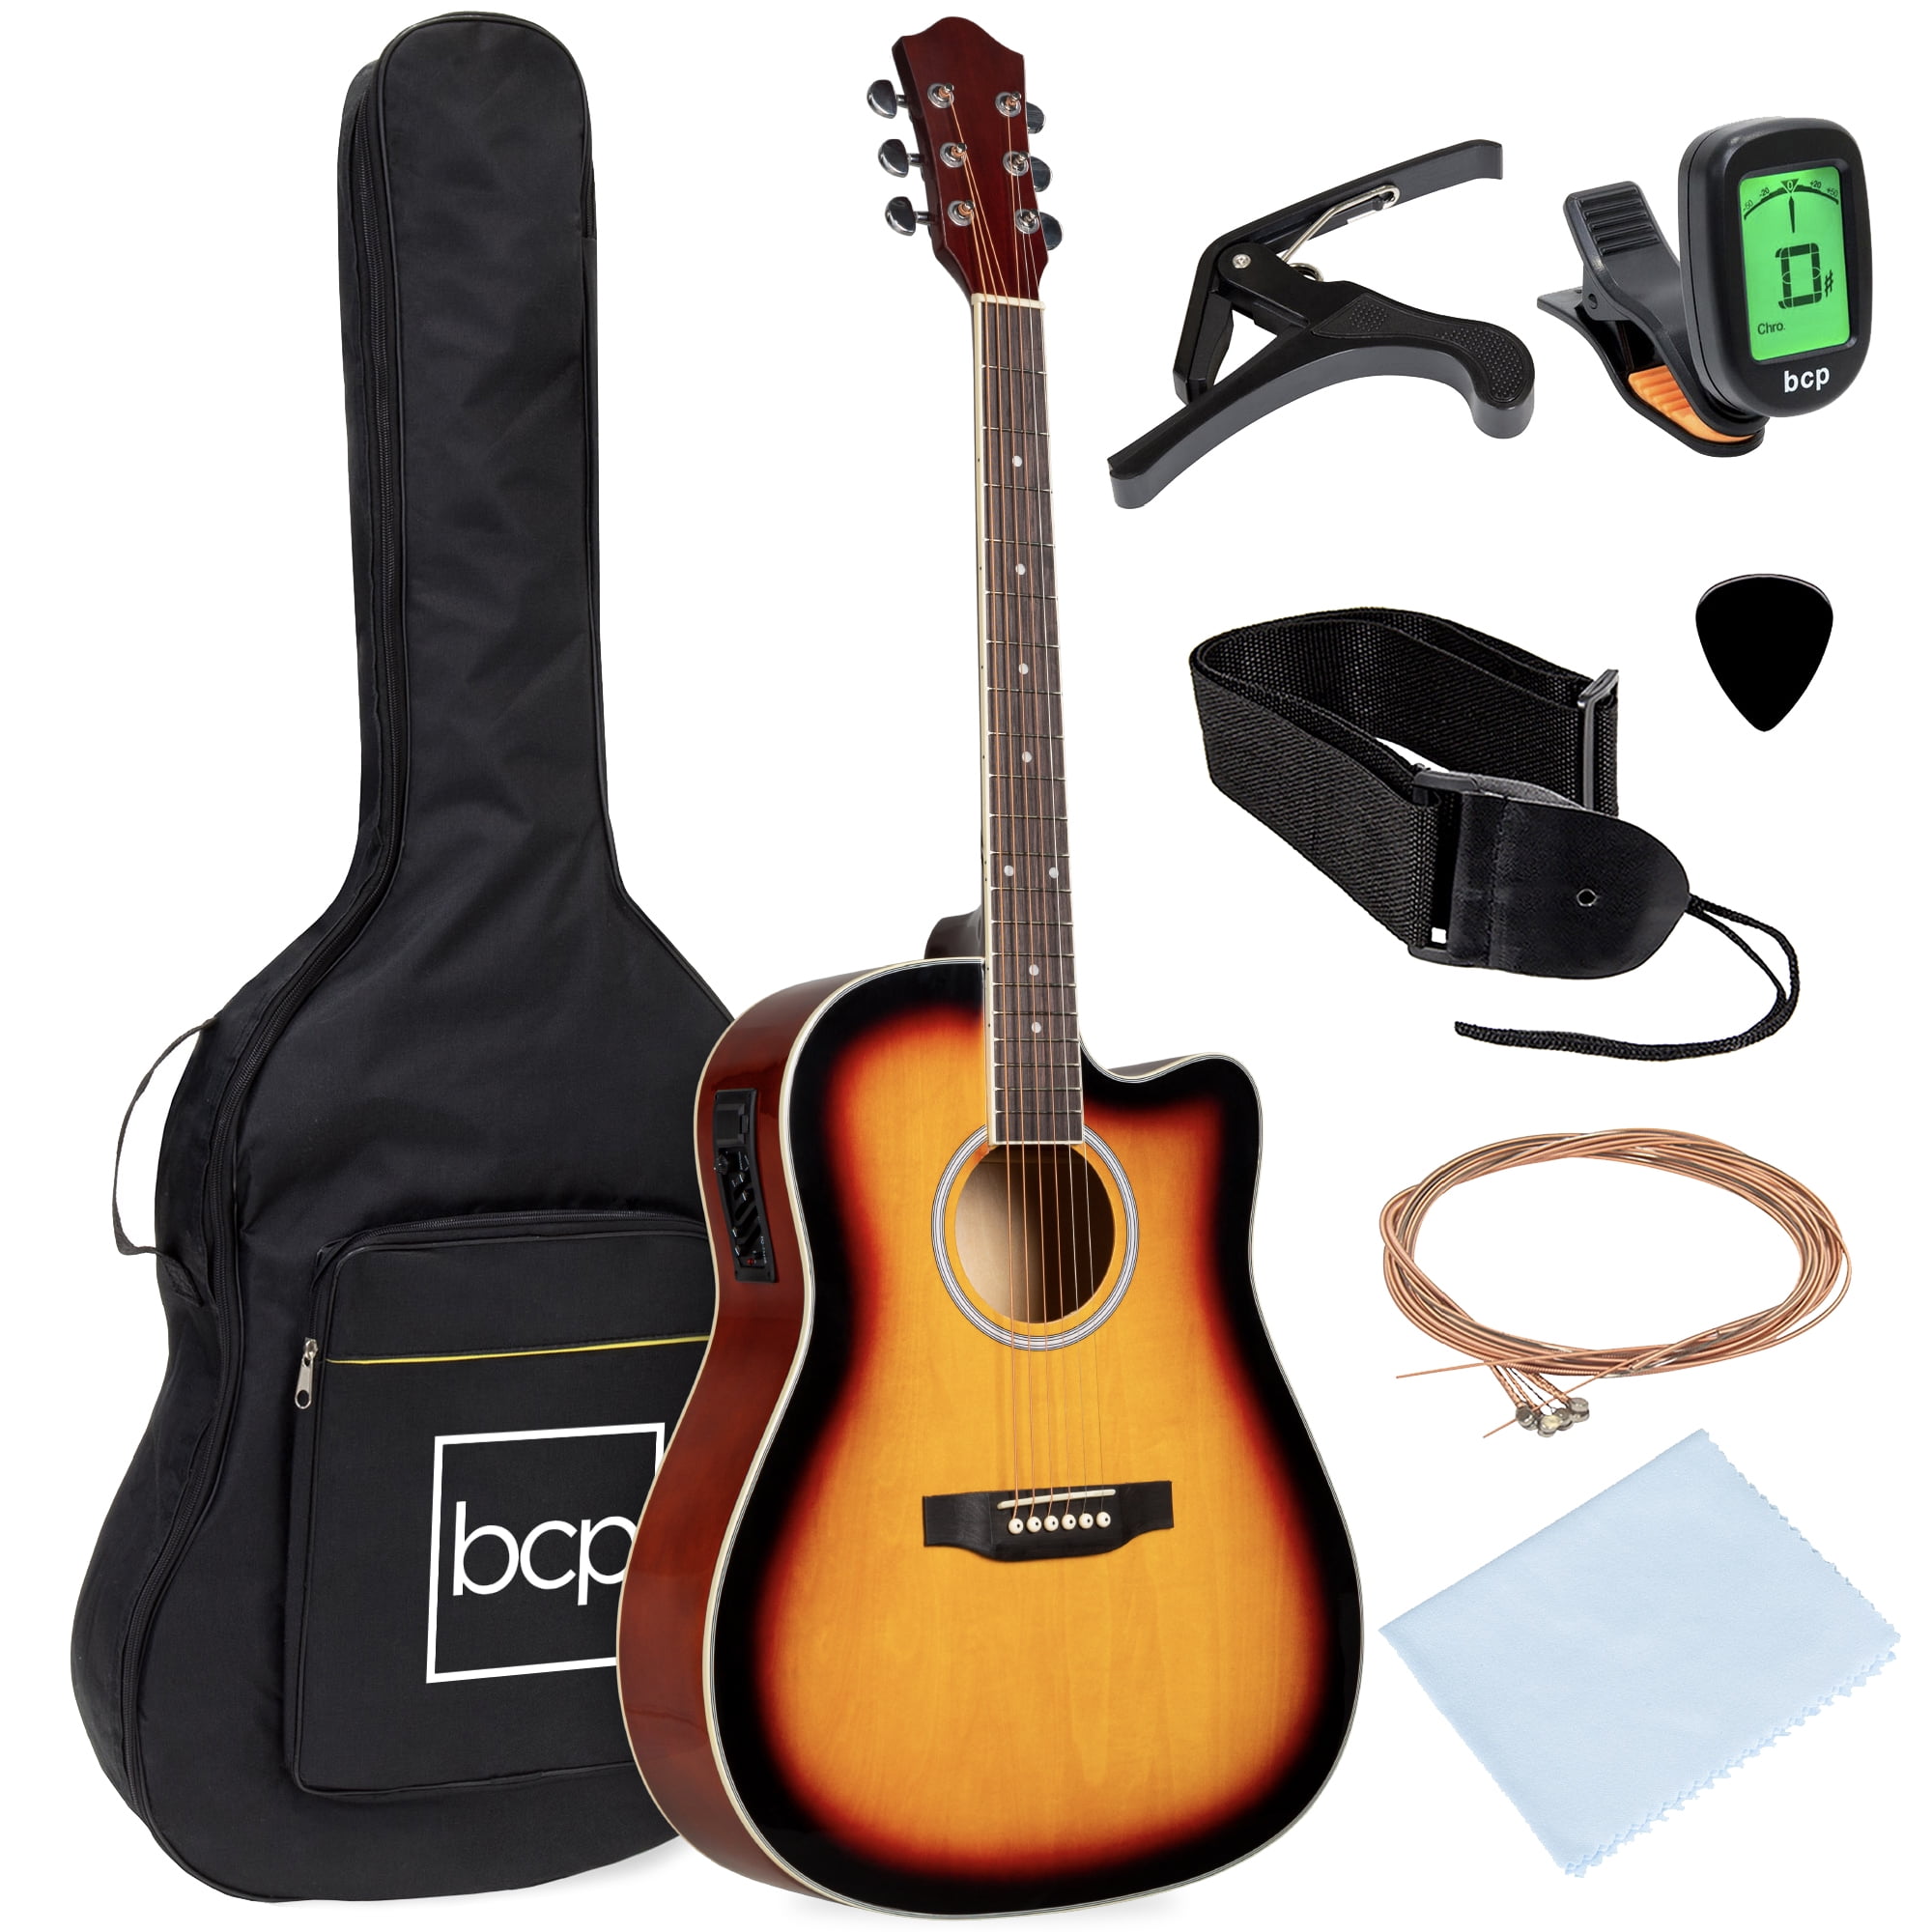 AeroBand Guitar Stringless, Acoustic Electric Travel Guitar, Portable  Silent Guitar with Removable Fretboard Smart Guitar for Beginners, Adults